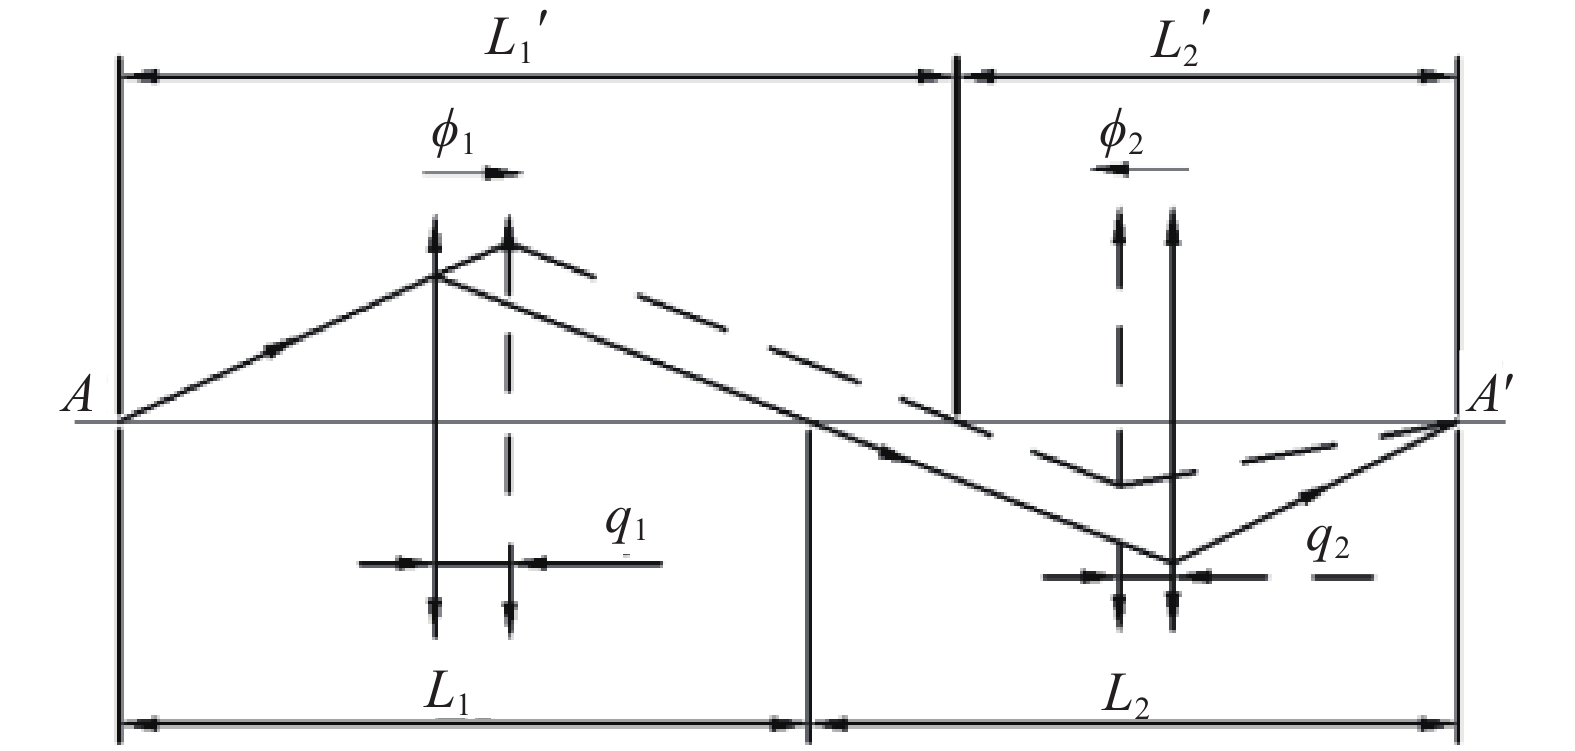 Conjugate distance graph of Φ1 and Φ2 groups